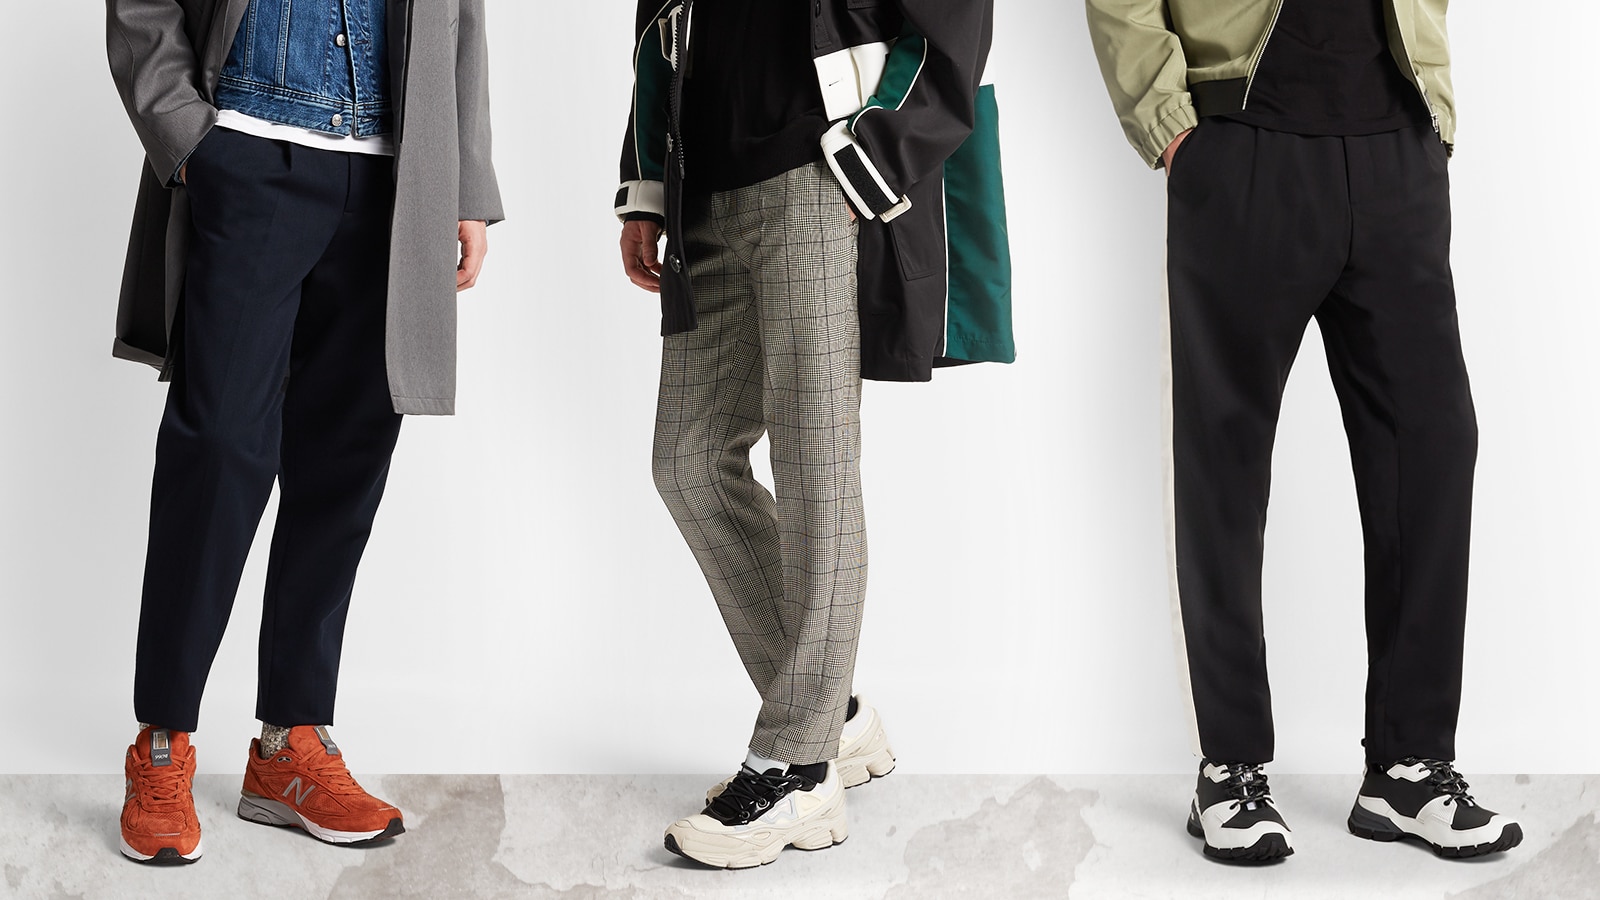 Three Ways To Wear: The “Ugly” Sneaker Trend, The Journal